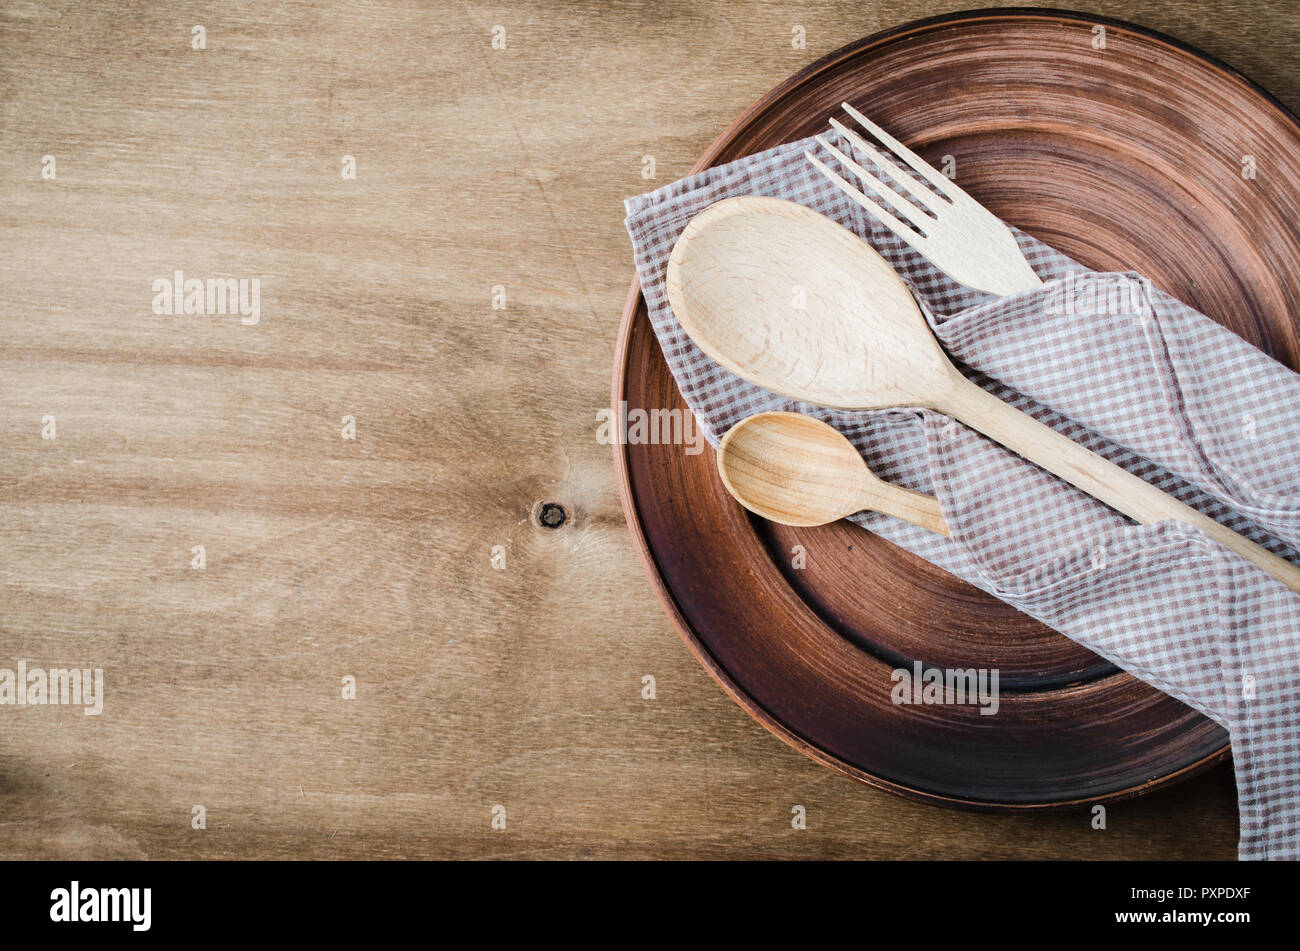 Rustic Kitchen Utensils: the Ceramic Plates and Wooden Cutlery on Wooden  Background. Home Wares. Kitchen Decor in Rustic Style. View From Above With  C Stock Photo - Alamy